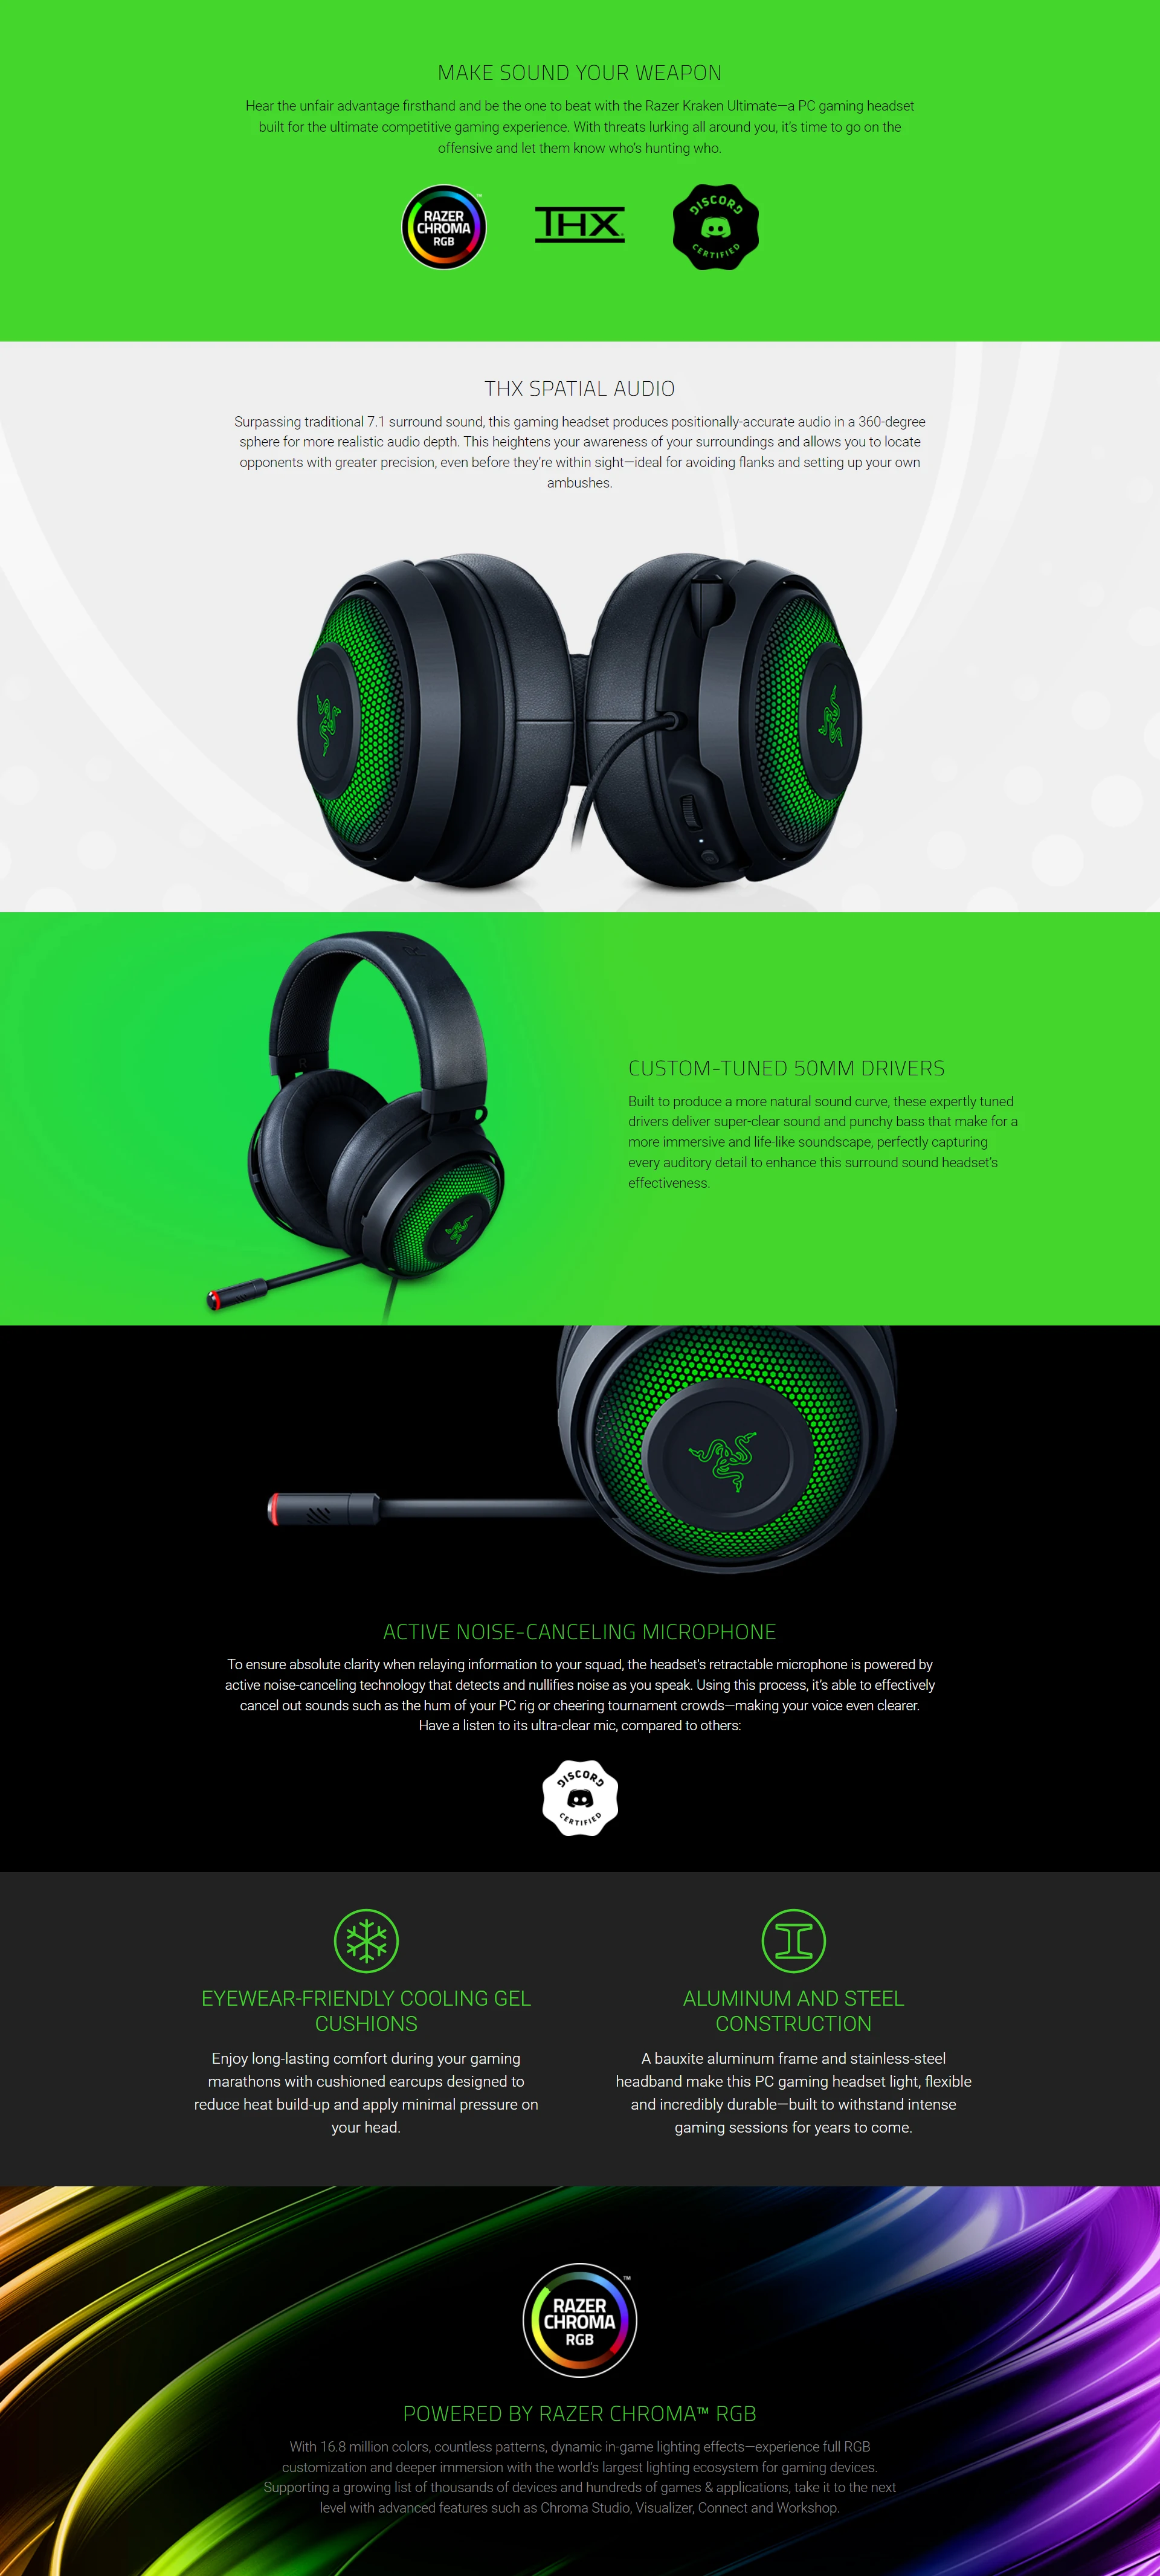 Overview - Razer Kraken Ultimate USB Surround Sound Headset with ANC Microphone